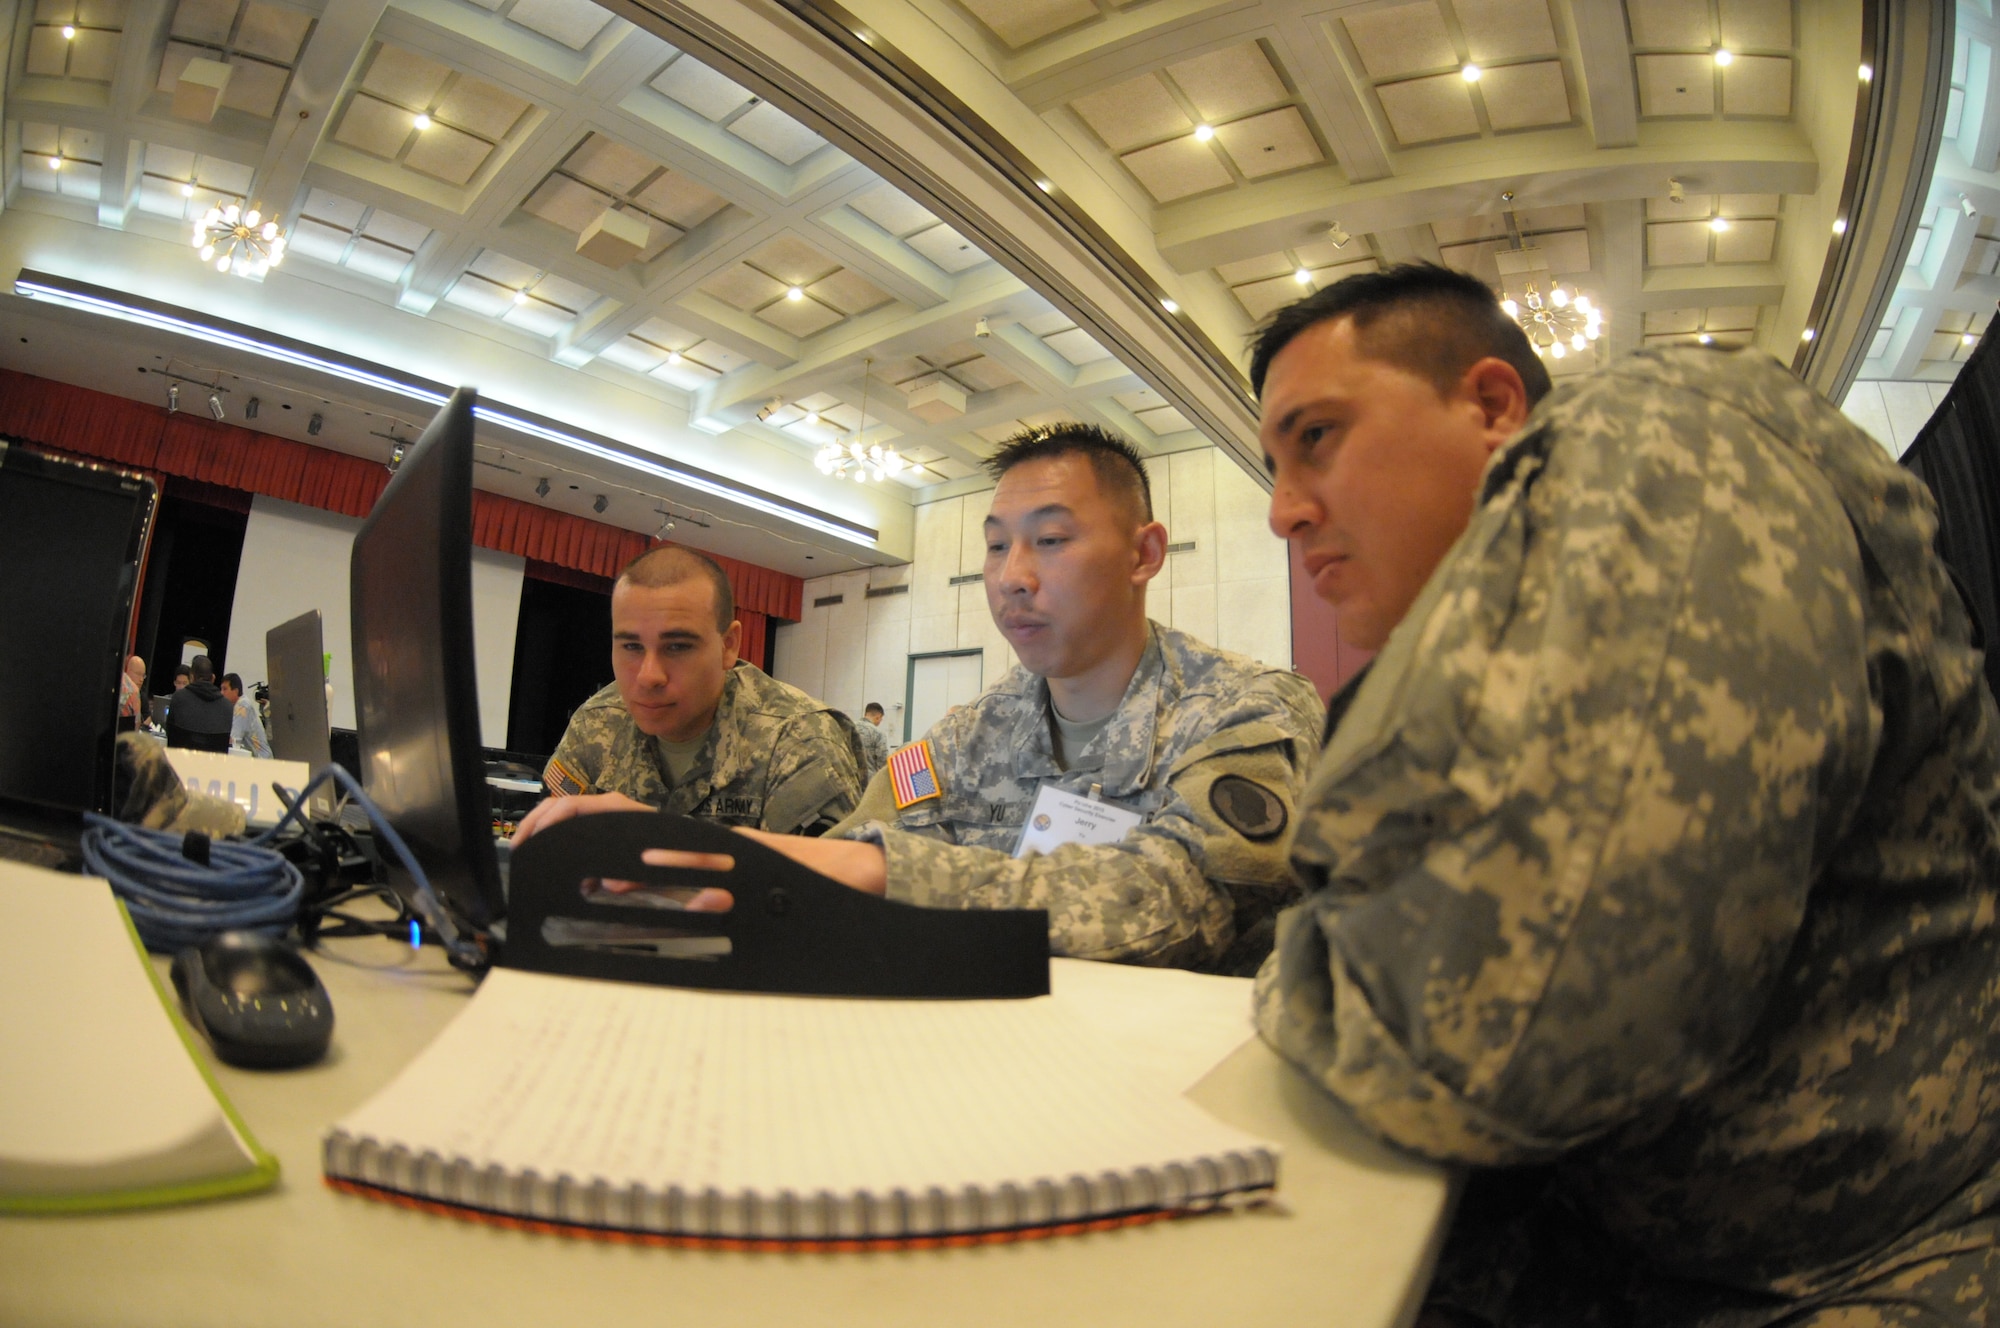 Hawaii Army National Guard soldiers discuss cyber defensive strategies during the Po’oihe 2015 Cyber Security Exercise at the University of Hawaii Manoa Campus Center Ballroom on June 4, 2015. Po’oihe is part of the hurricane preparedness Exercise Vigilant Guard / Makani Pahili 2015 hosted by U.S. Northern Command, National Guard Bureau and the Hawaii Emergency Management Agency. (U.S. Air National Guard photo by Airman 1st Class Robert Cabuco)